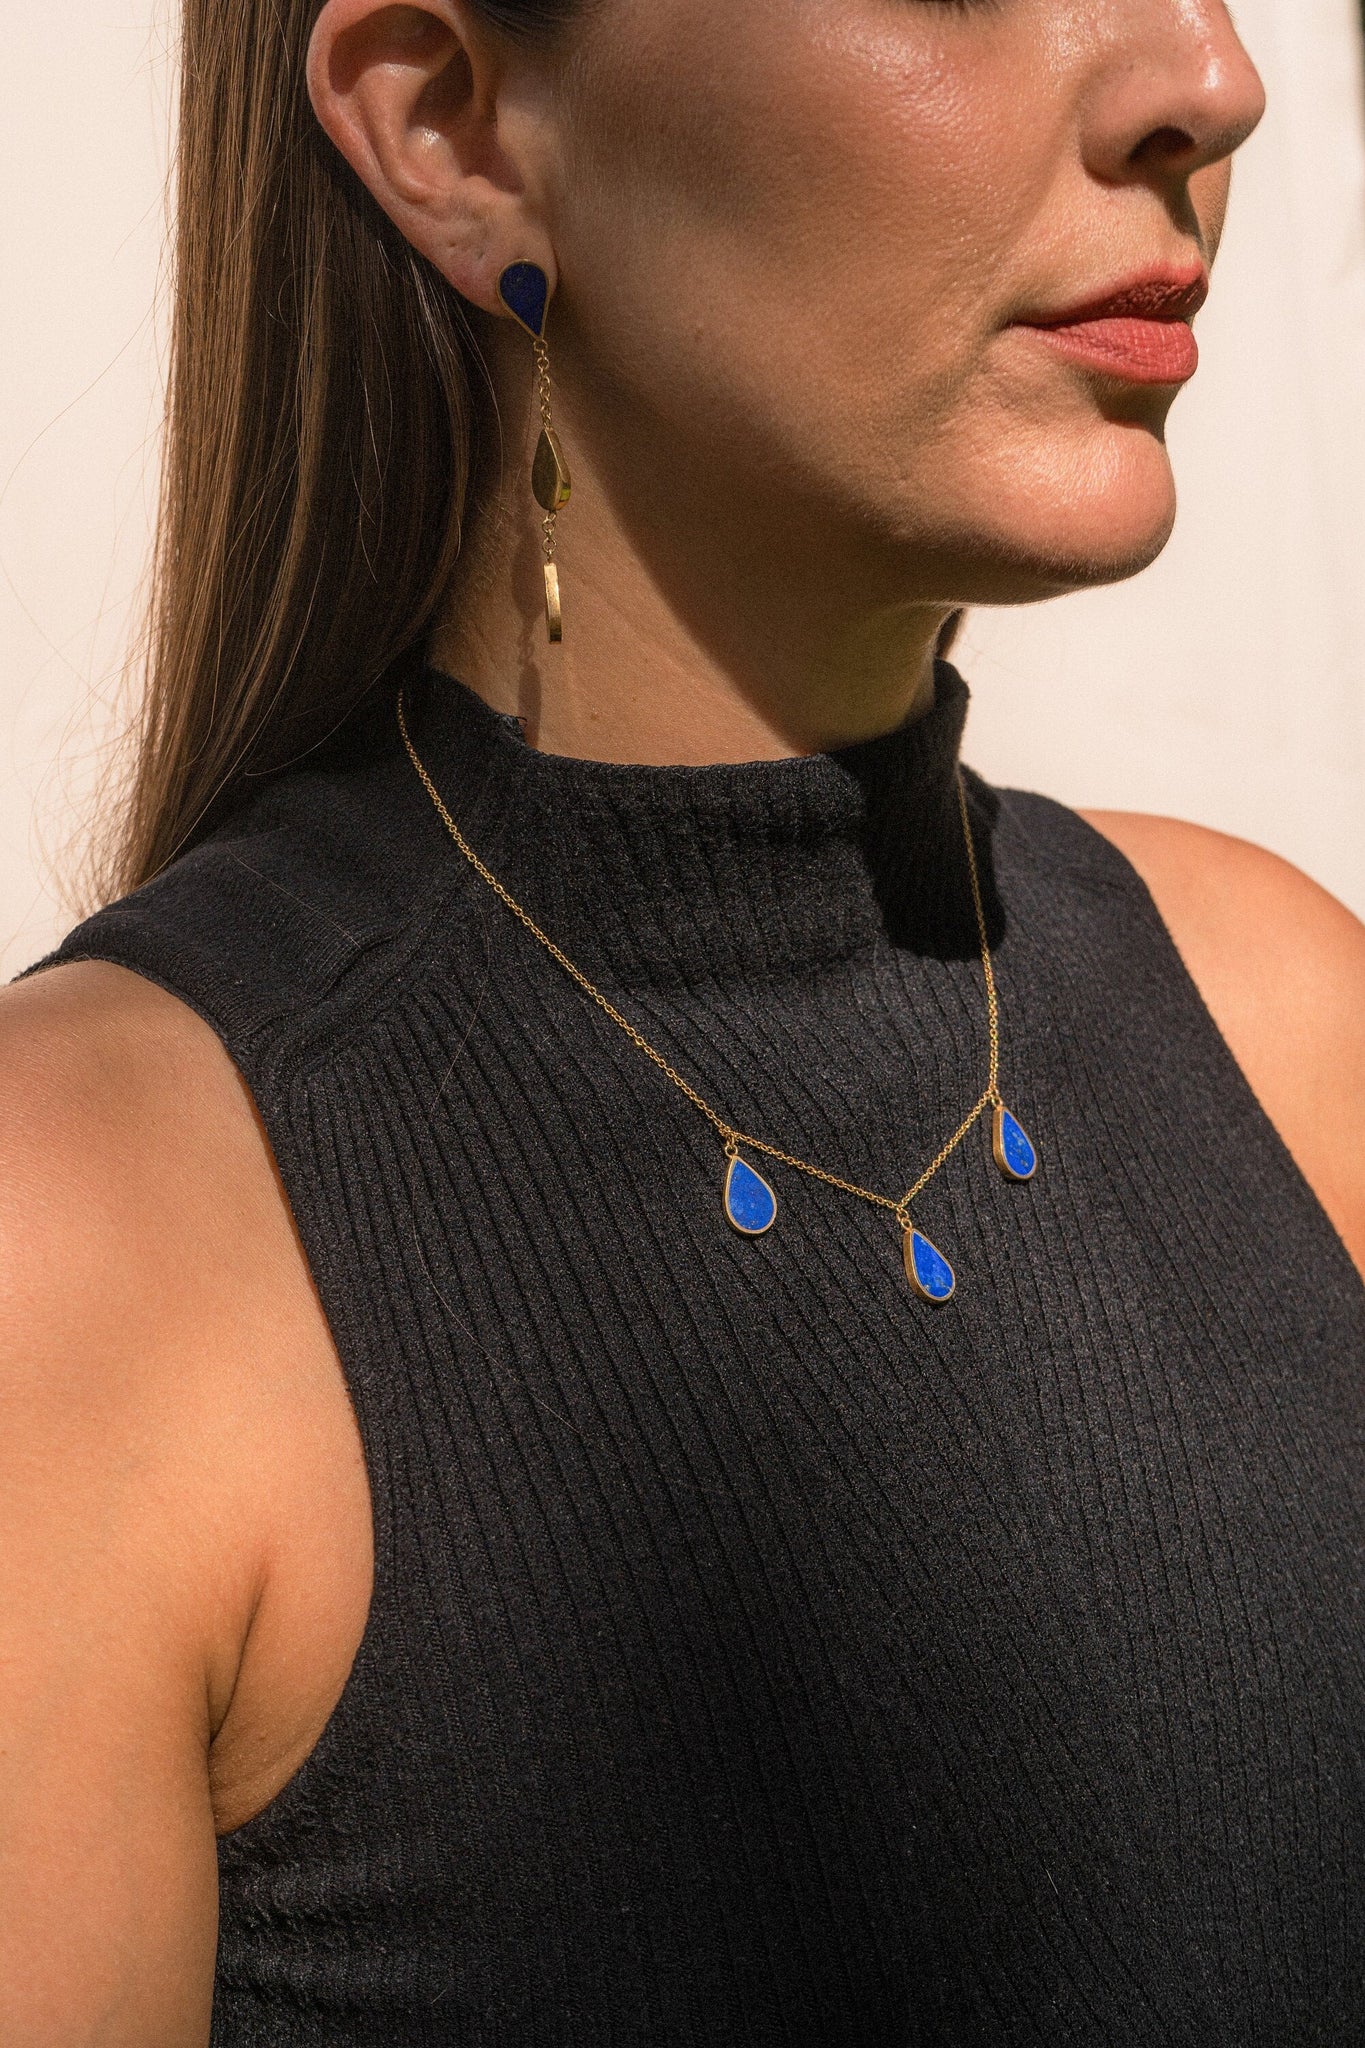 Handmade Afghan Blue Gemstone Lapis Lazuli Three Drop Gold Chain Necklace Elegant Inspired Jewelry Bridesmaid Chic Bridal Gift for Her